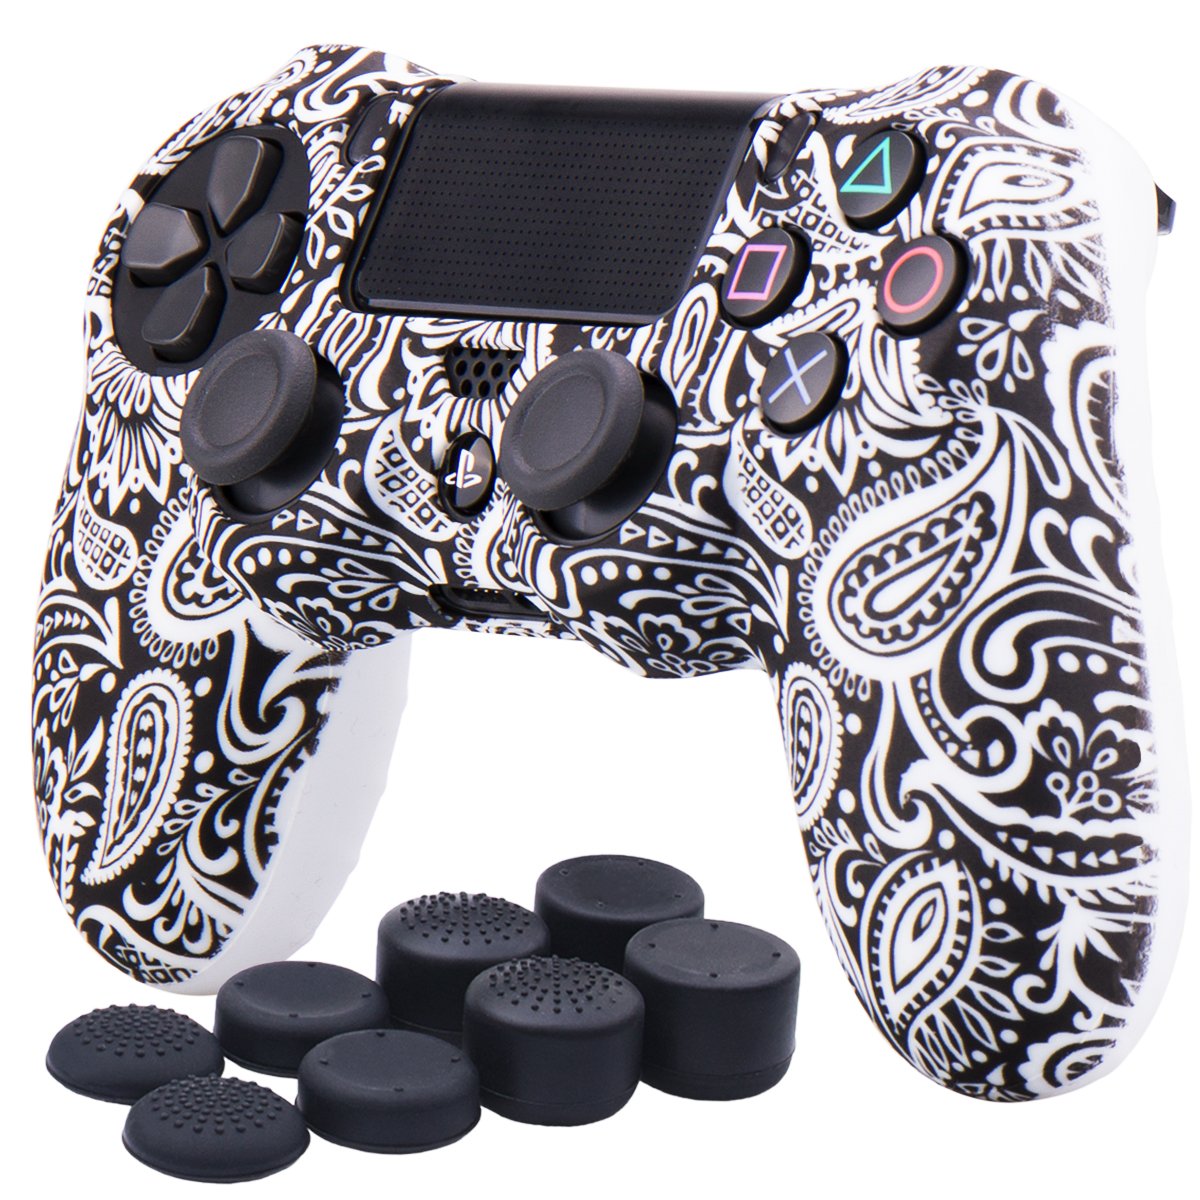 PS4 Controller Silicone Skin with Finger Grips Bundle BN34